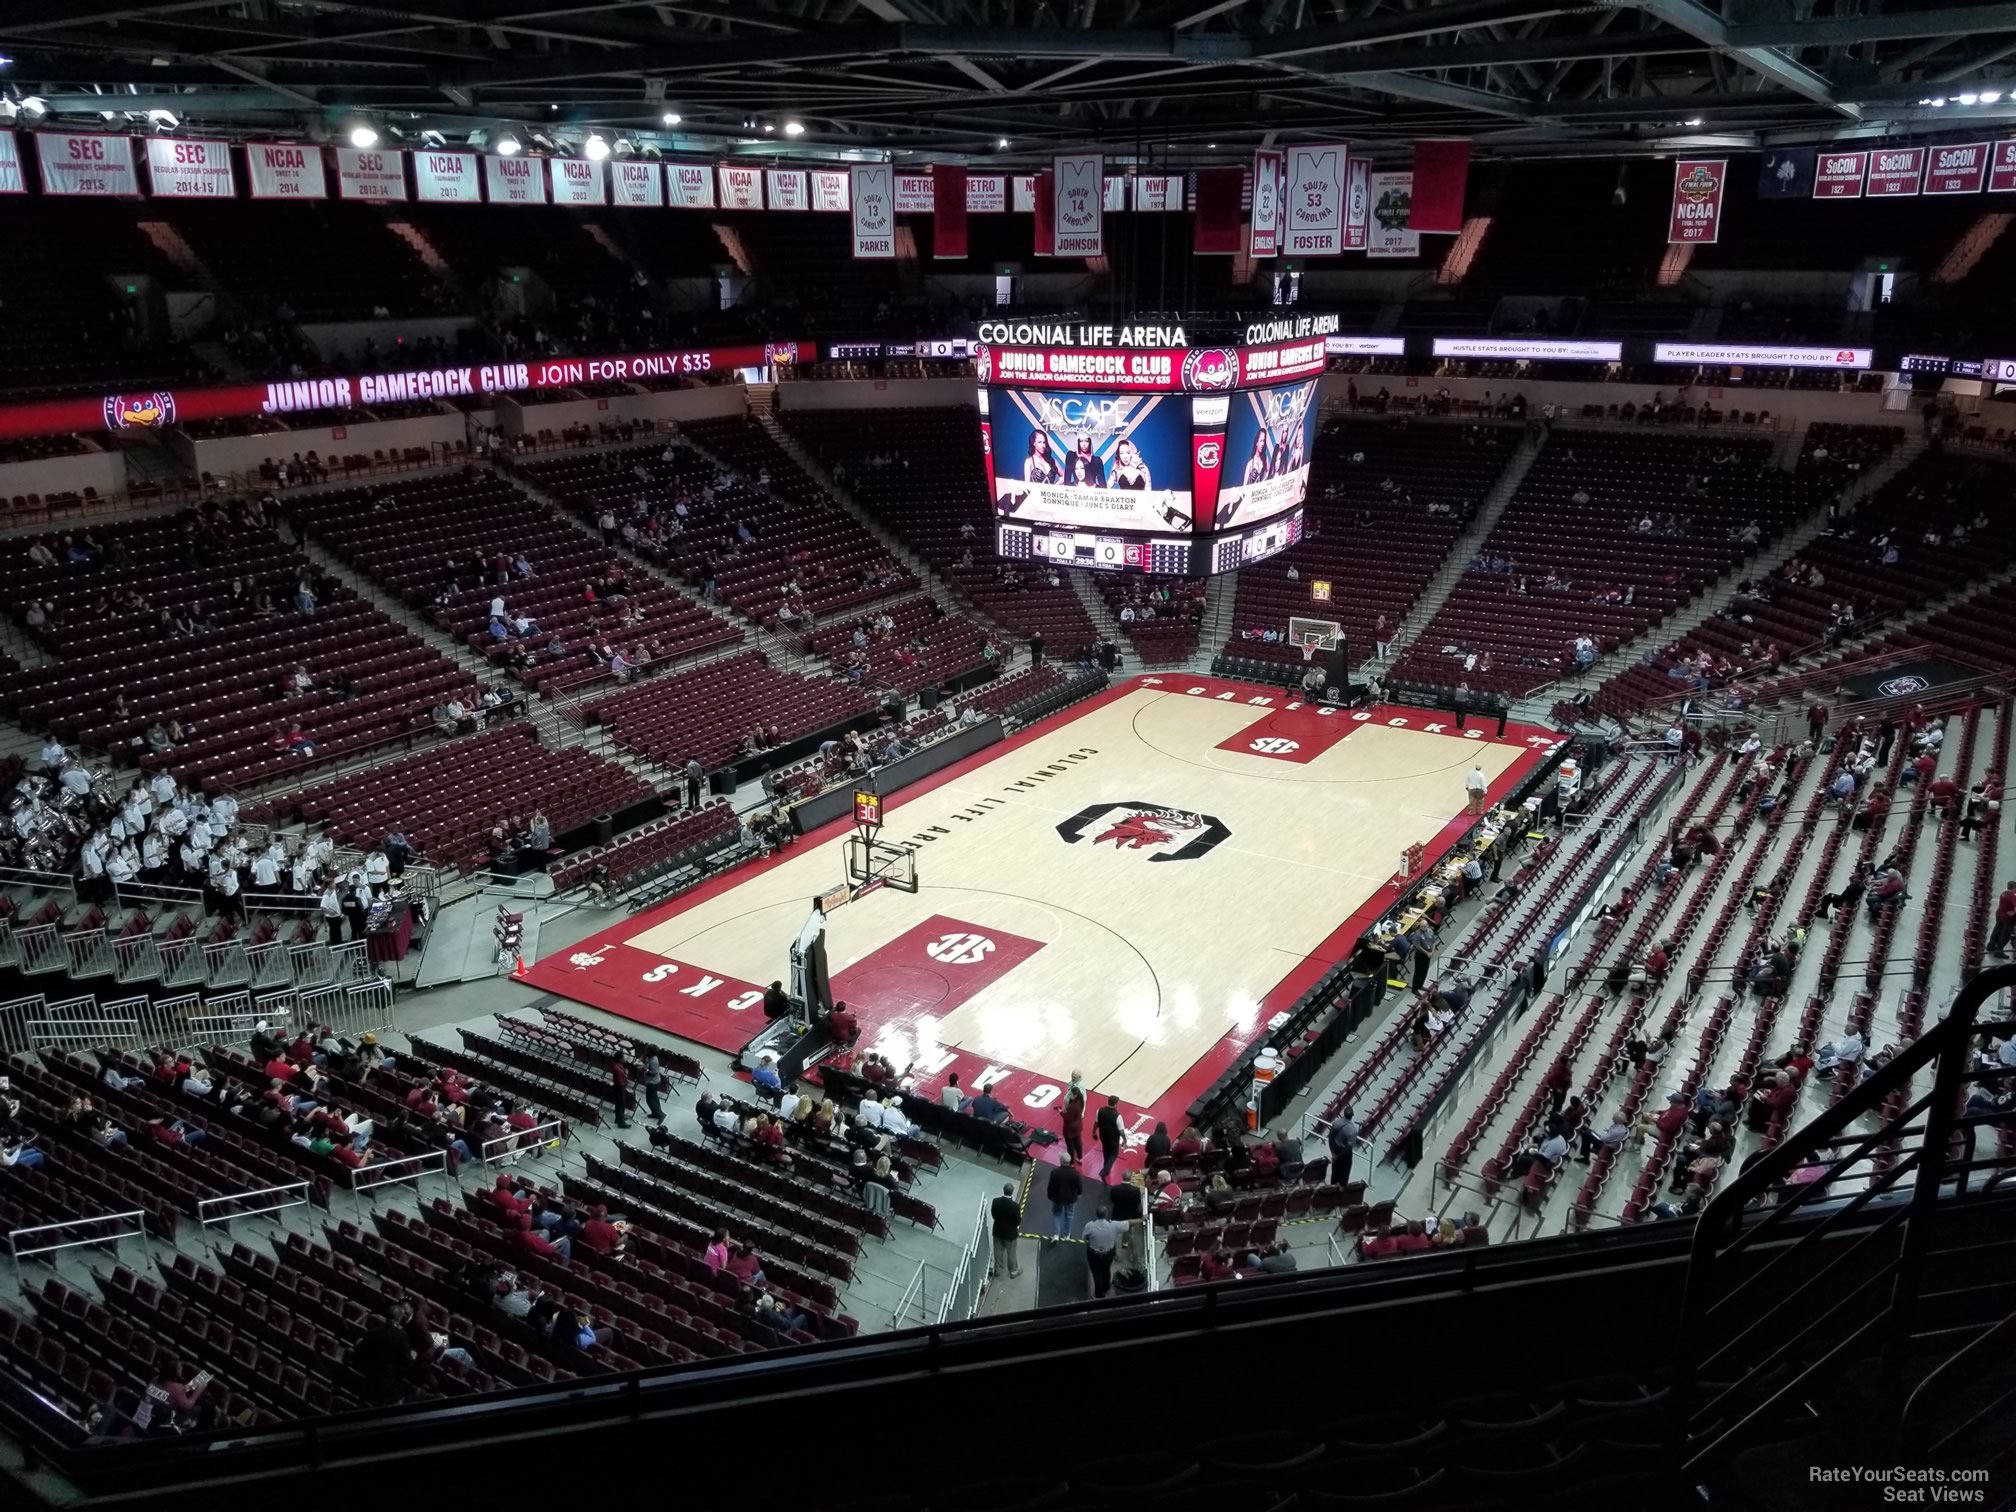 section 213, row 7 seat view  for basketball - colonial life arena